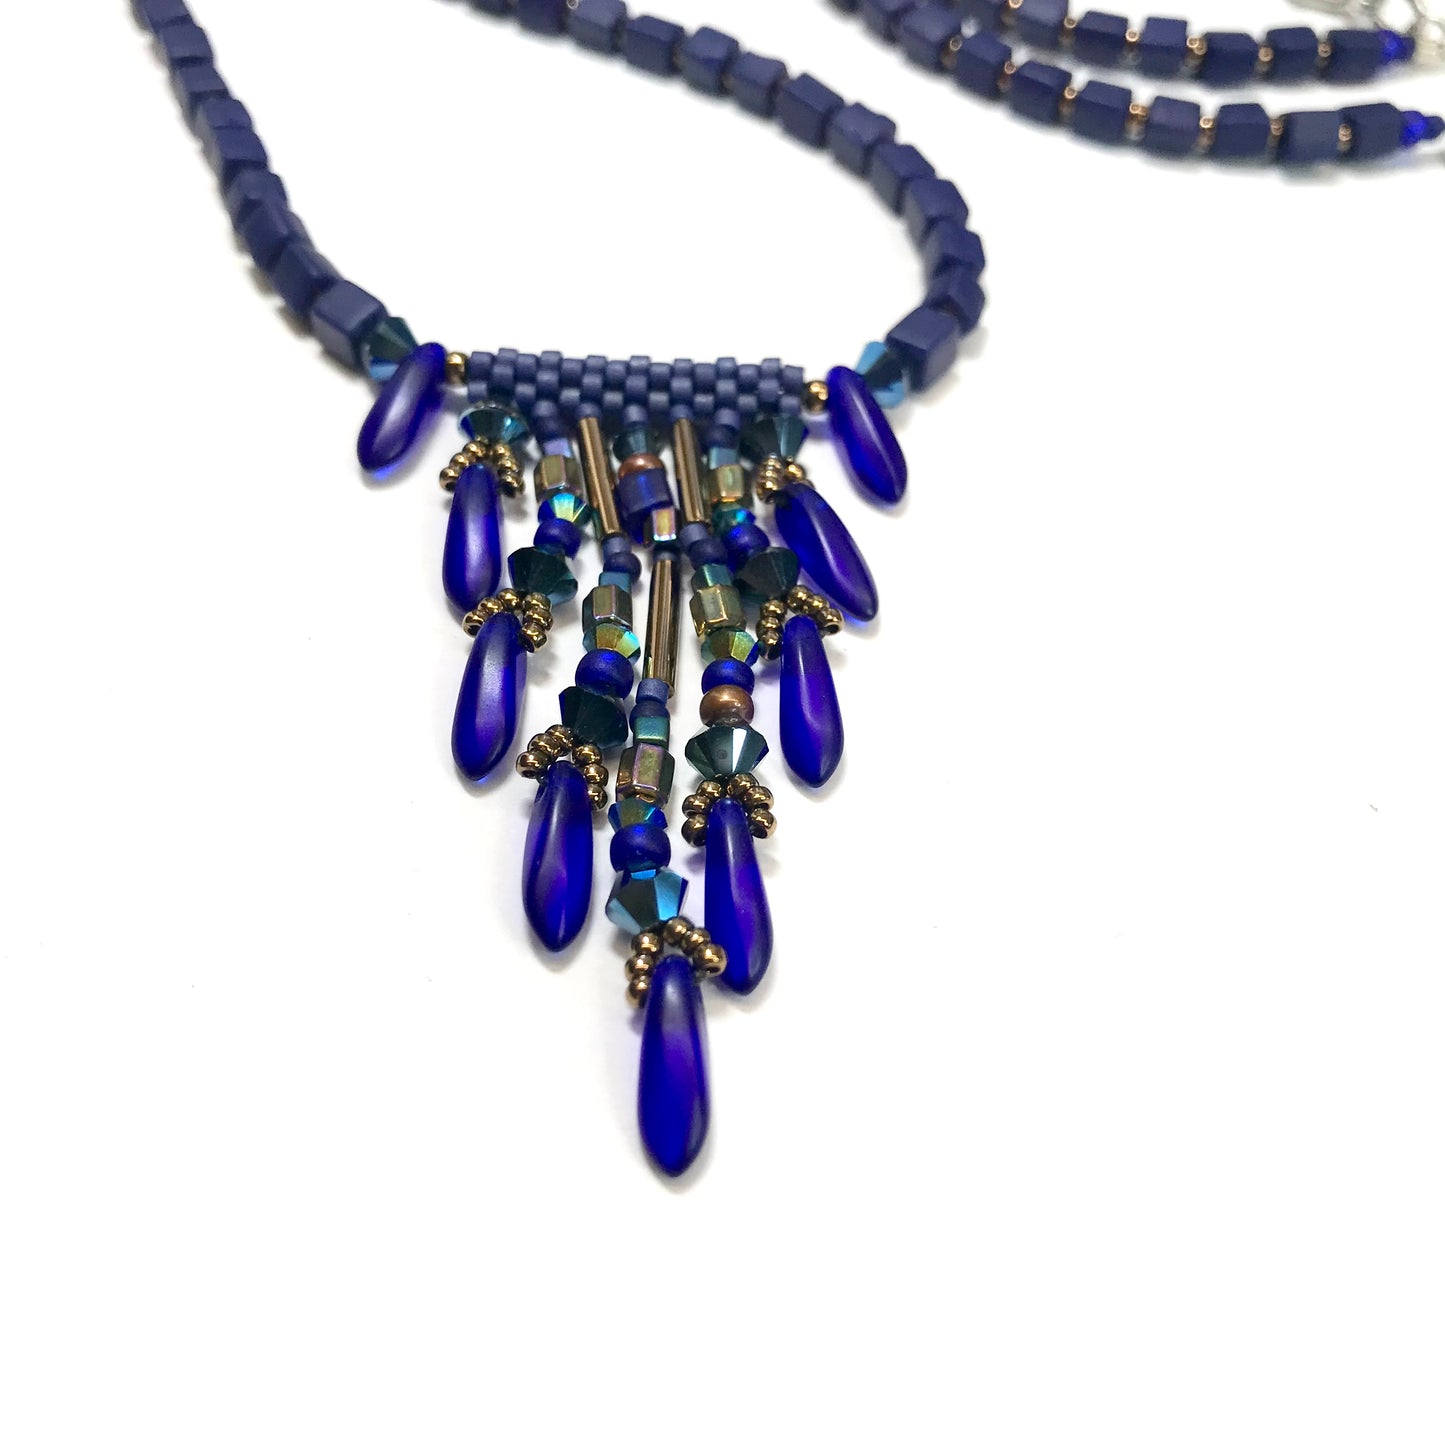 Cobalt with Blue Crystal Fringy Necklace - 7 strands